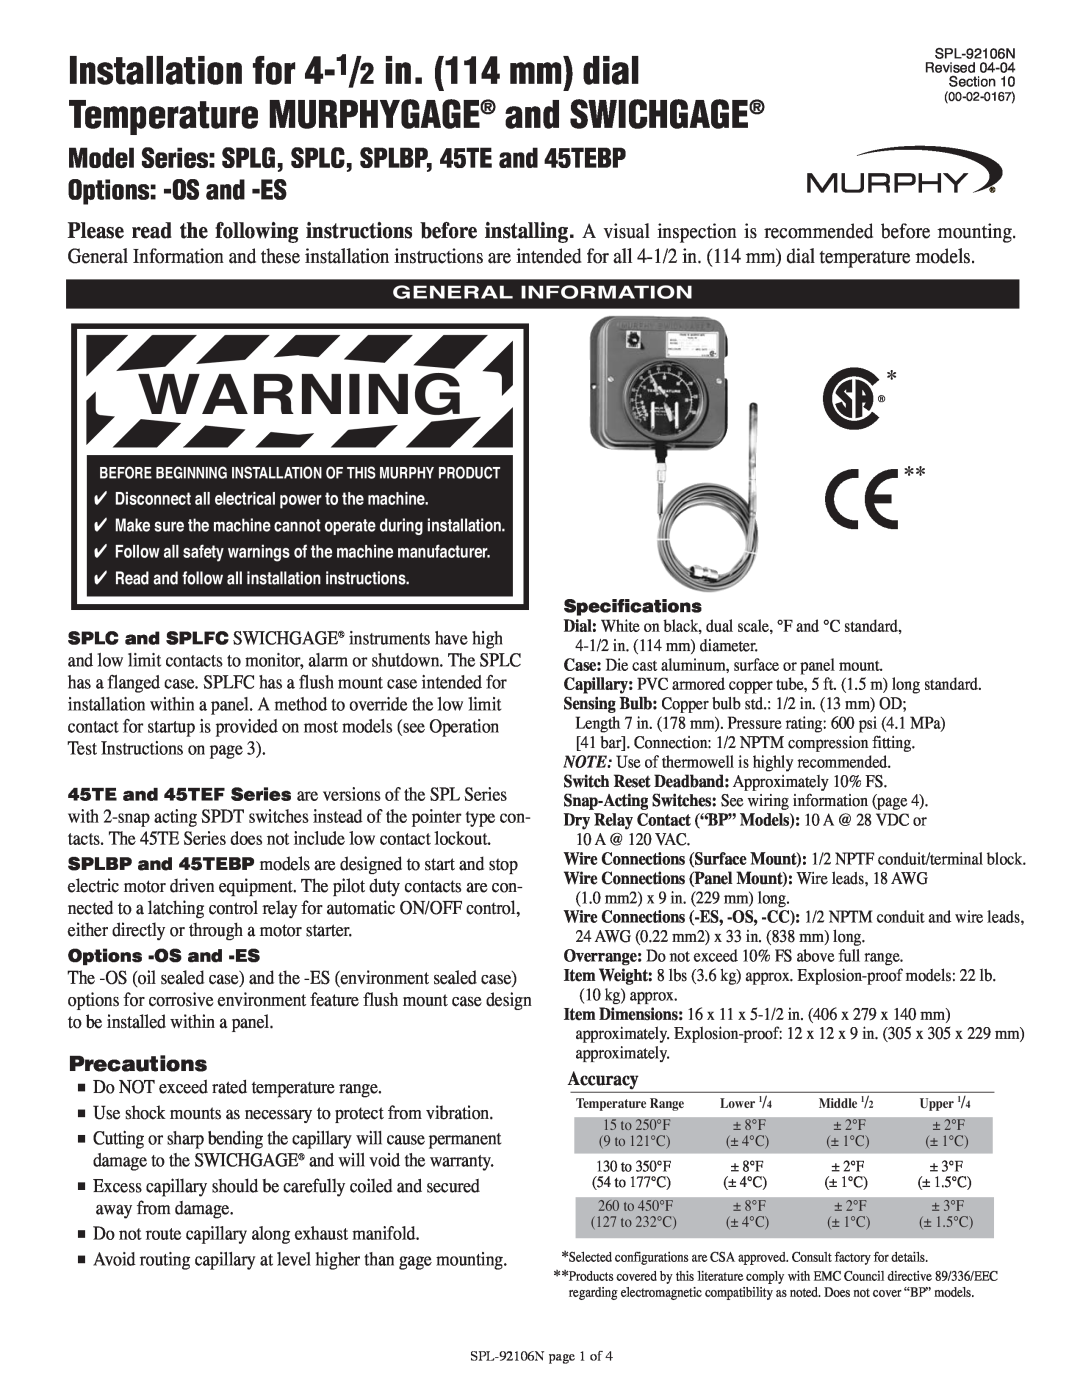 Murphy warranty Model Series SPLG, SPLC, SPLBP, 45TE and 45TEBP Options -OS and -ES, Precautions, Accuracy 